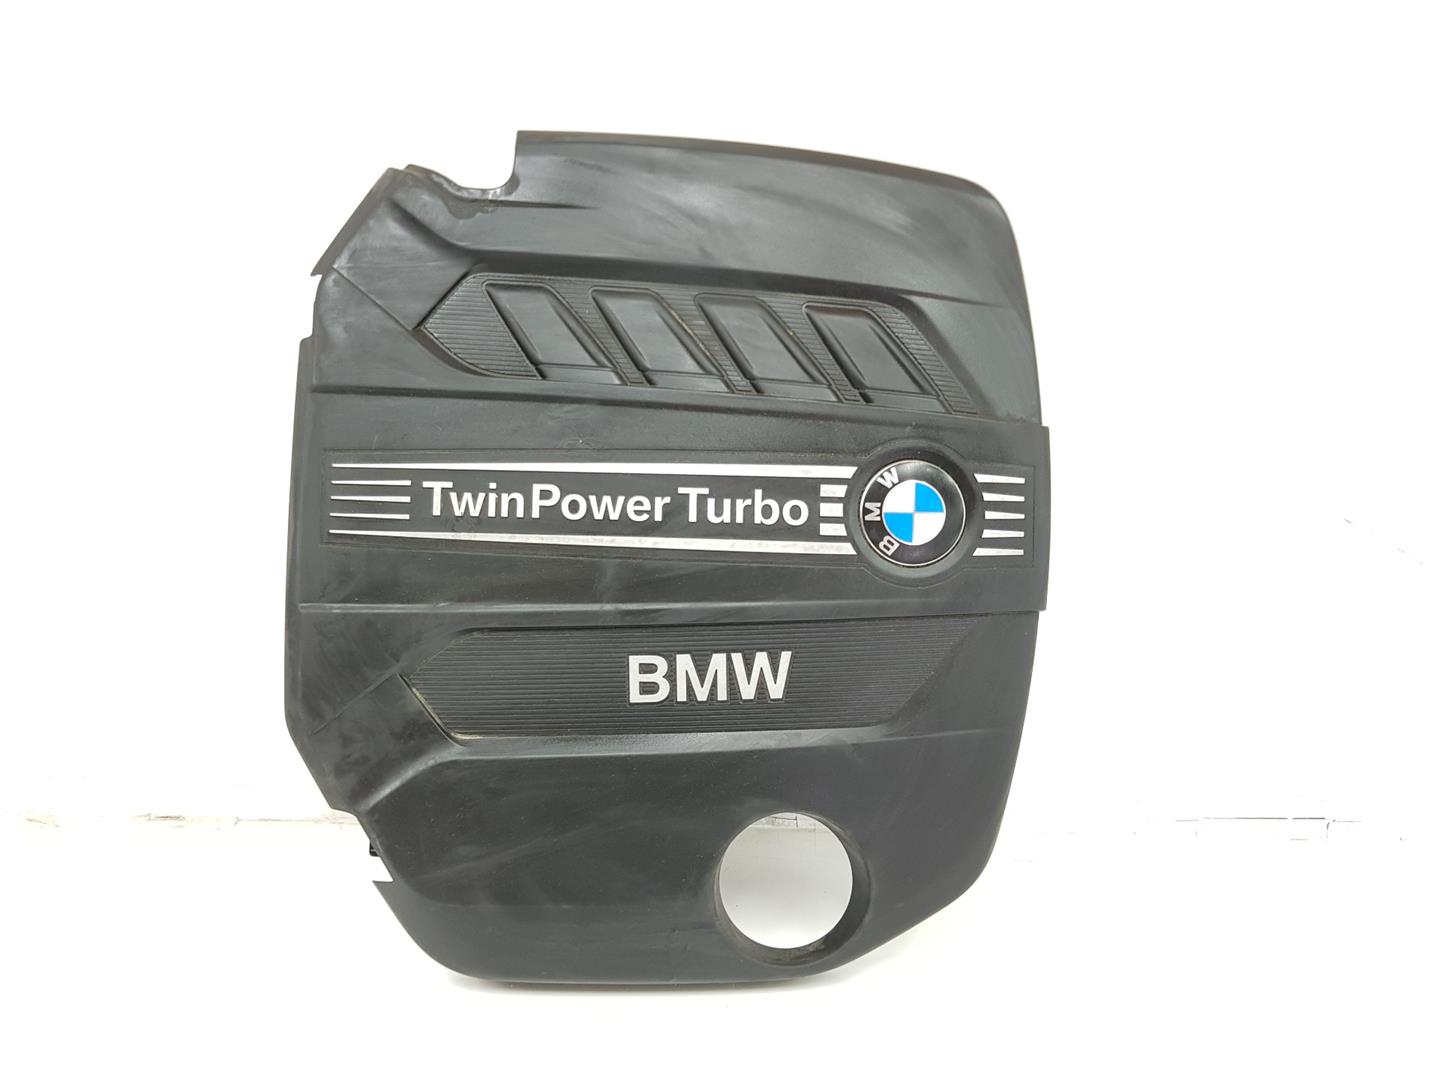 BMW 1 Series F20/F21 (2011-2020) Engine Cover 7810802, 7810802 24825987